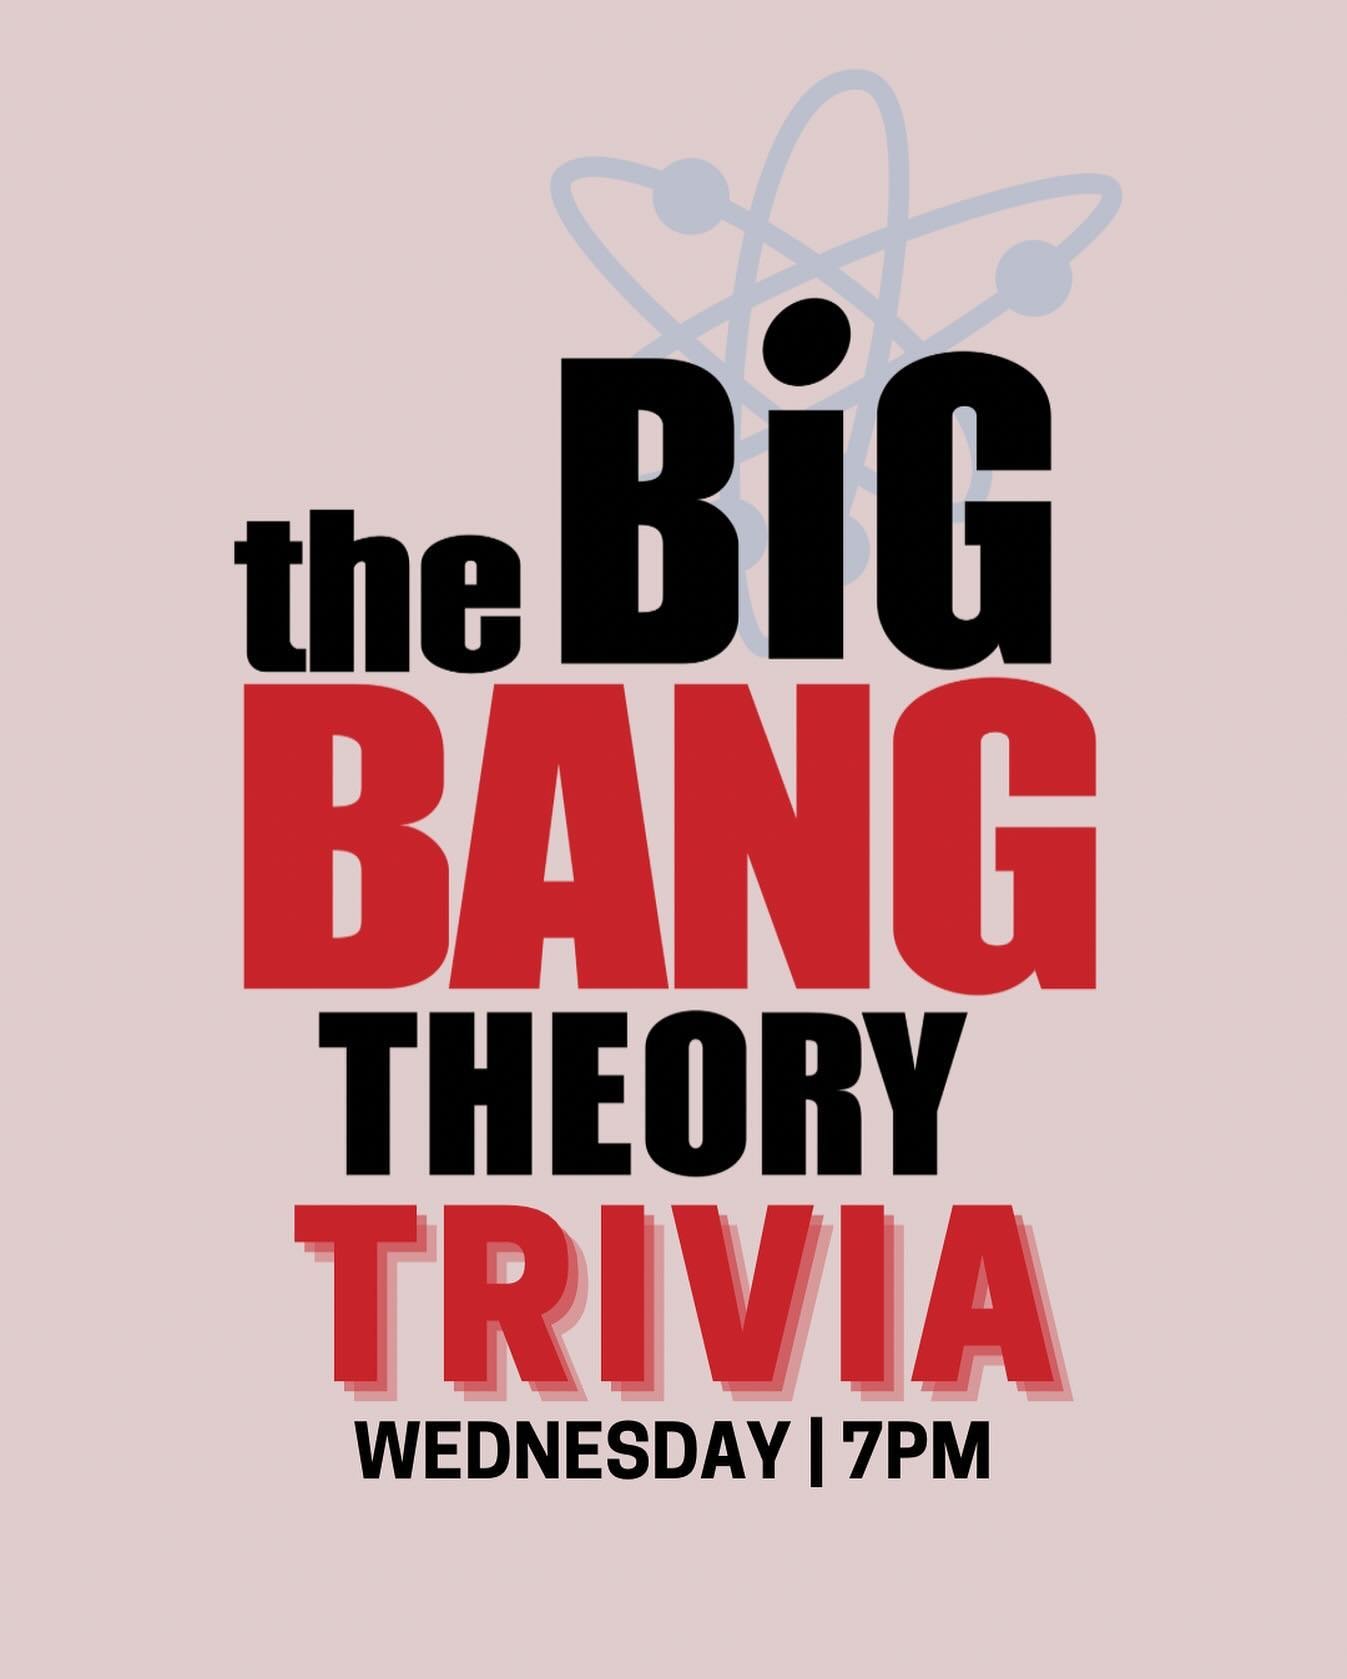 Wheel in your whiteboard, grab your dry erase markers and let&rsquo;s science! Tomorrow at 7 PM - Big Bang Theory trivia

#trivia #bigbang #wednesday #burgerandbeer #uppersandusky #uppersanduskyohio